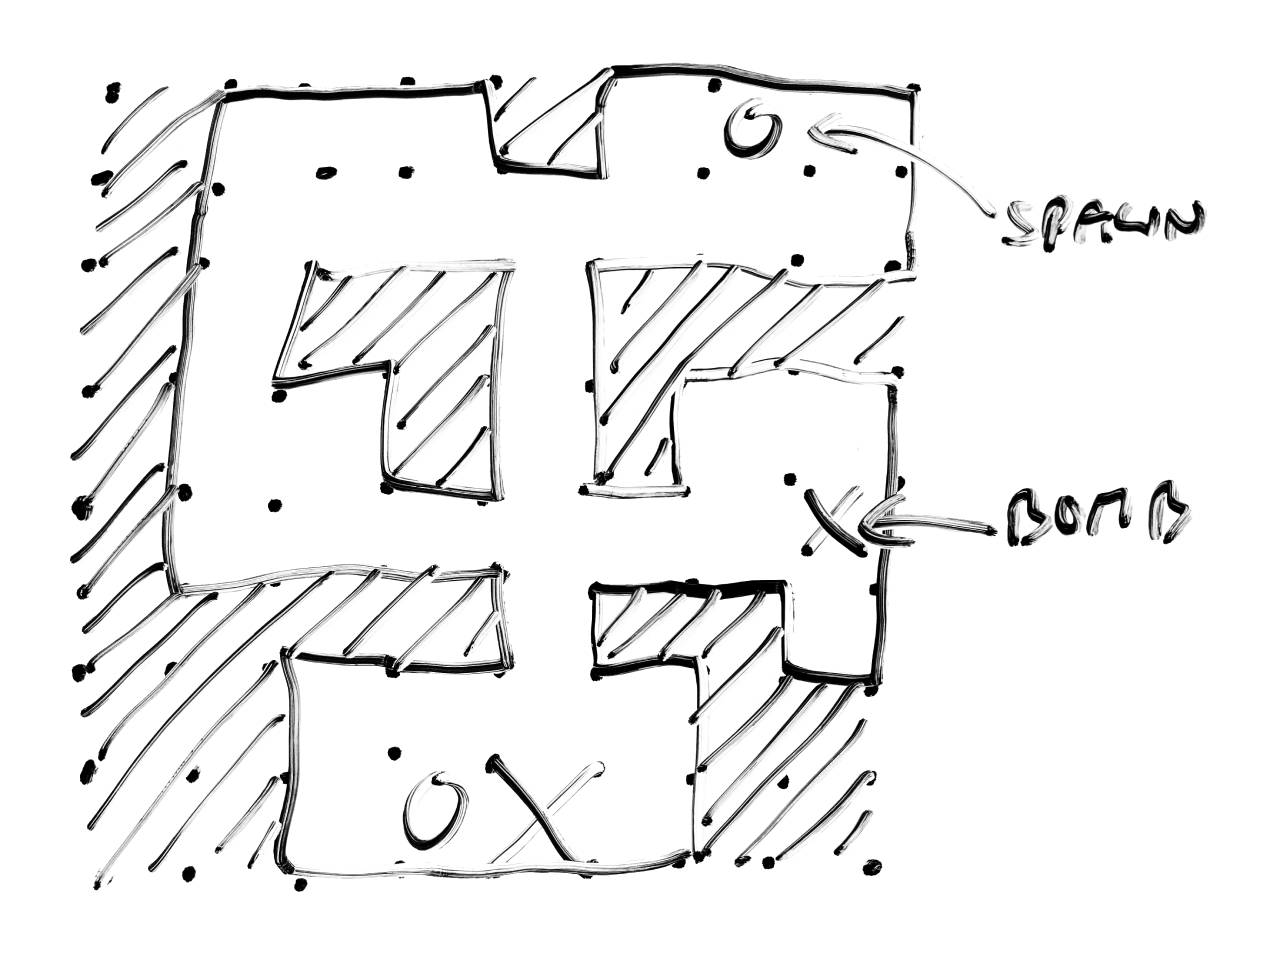 A low-fidelity, hand-drawn diagram showing a basic map layout against a 16x16 grid.